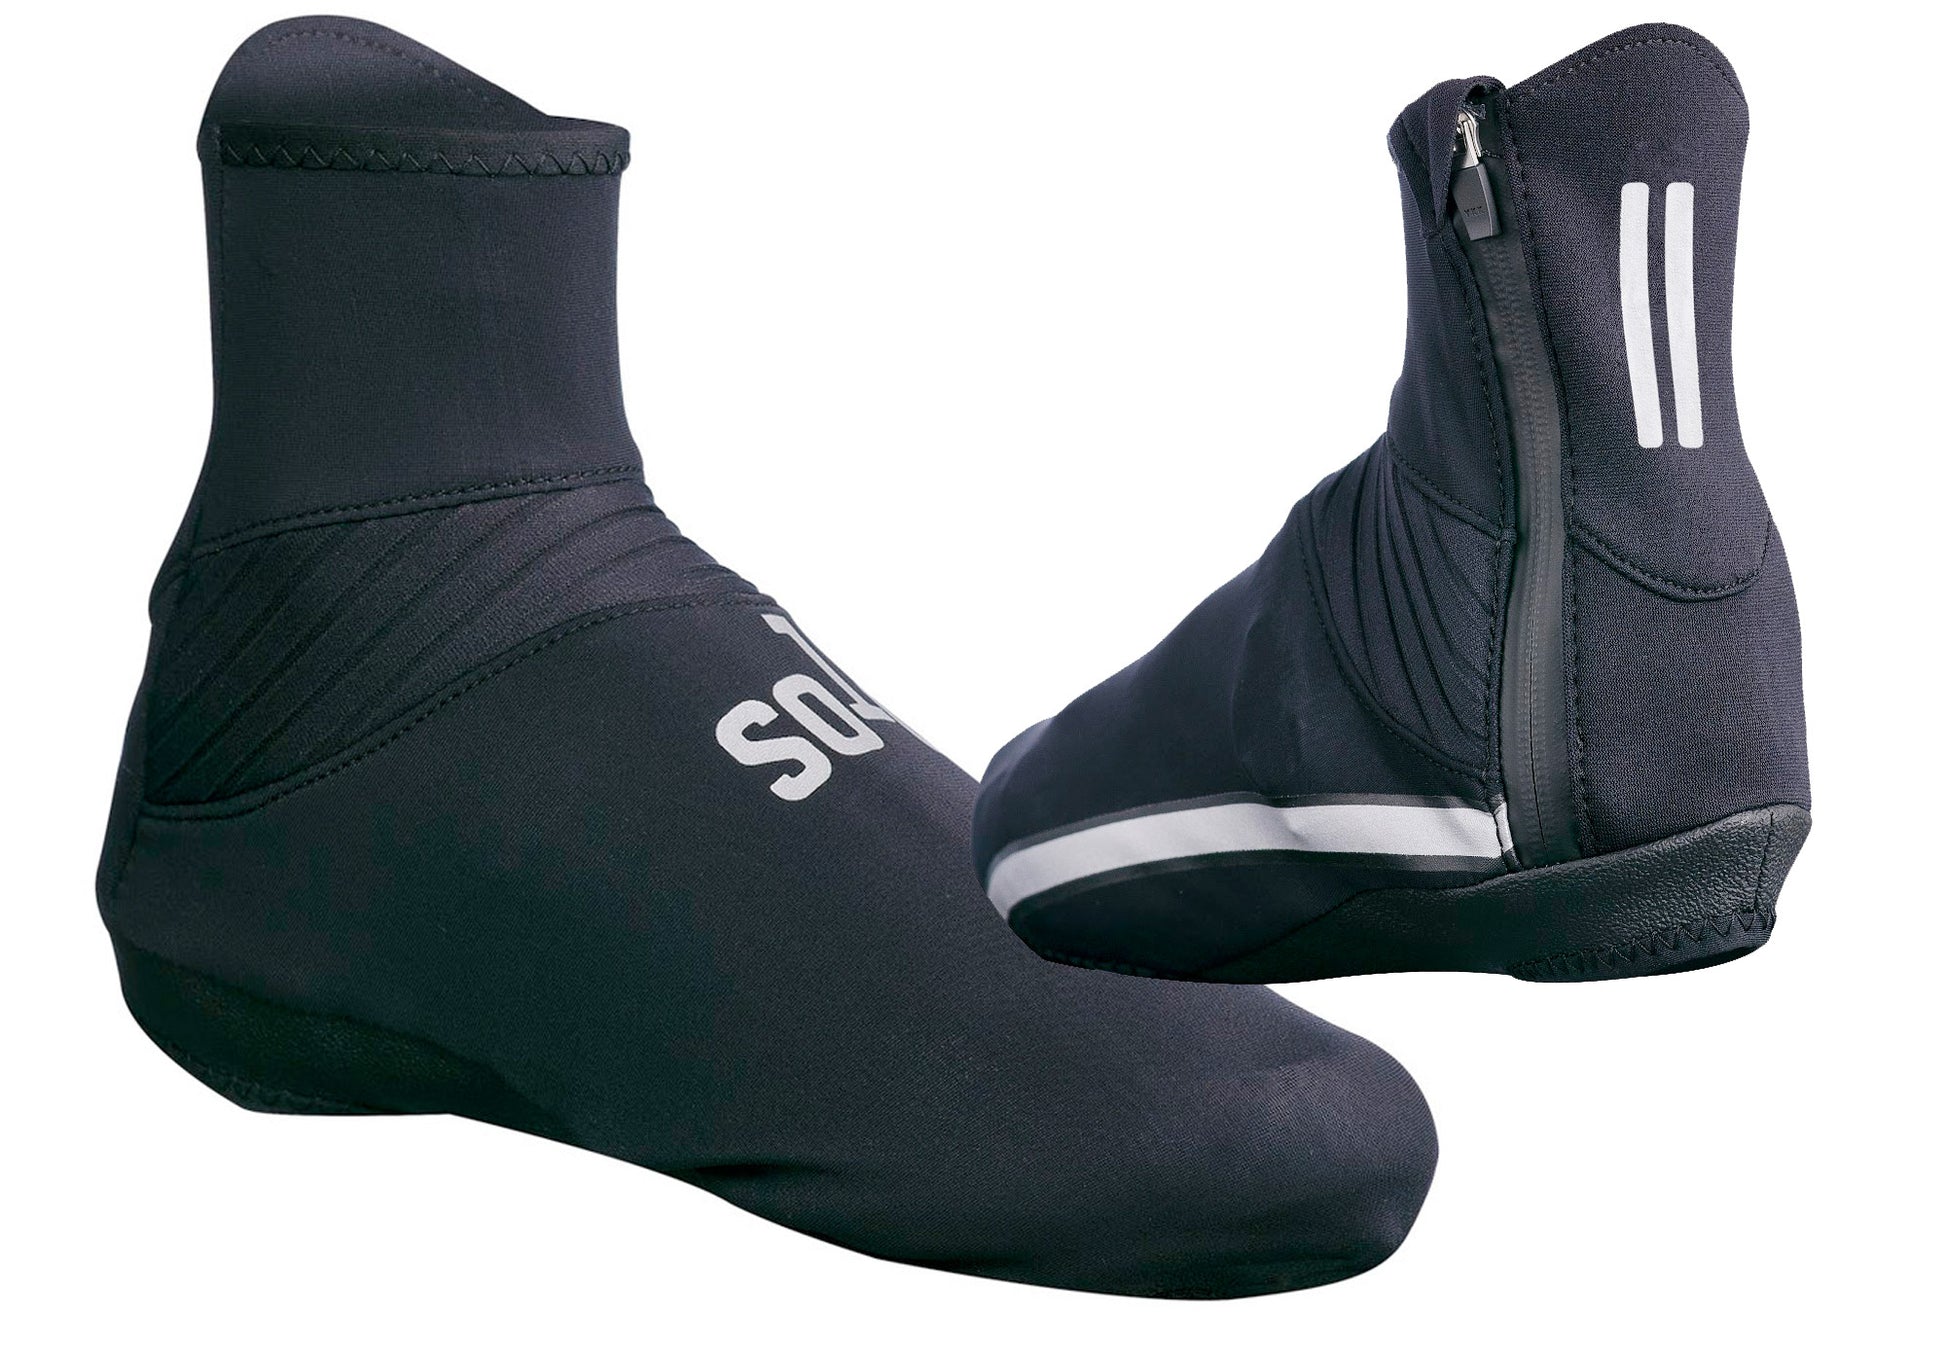 Solo Over Shoes (Large-Fits Shoes 42-43) Woolys Wheels Sydney